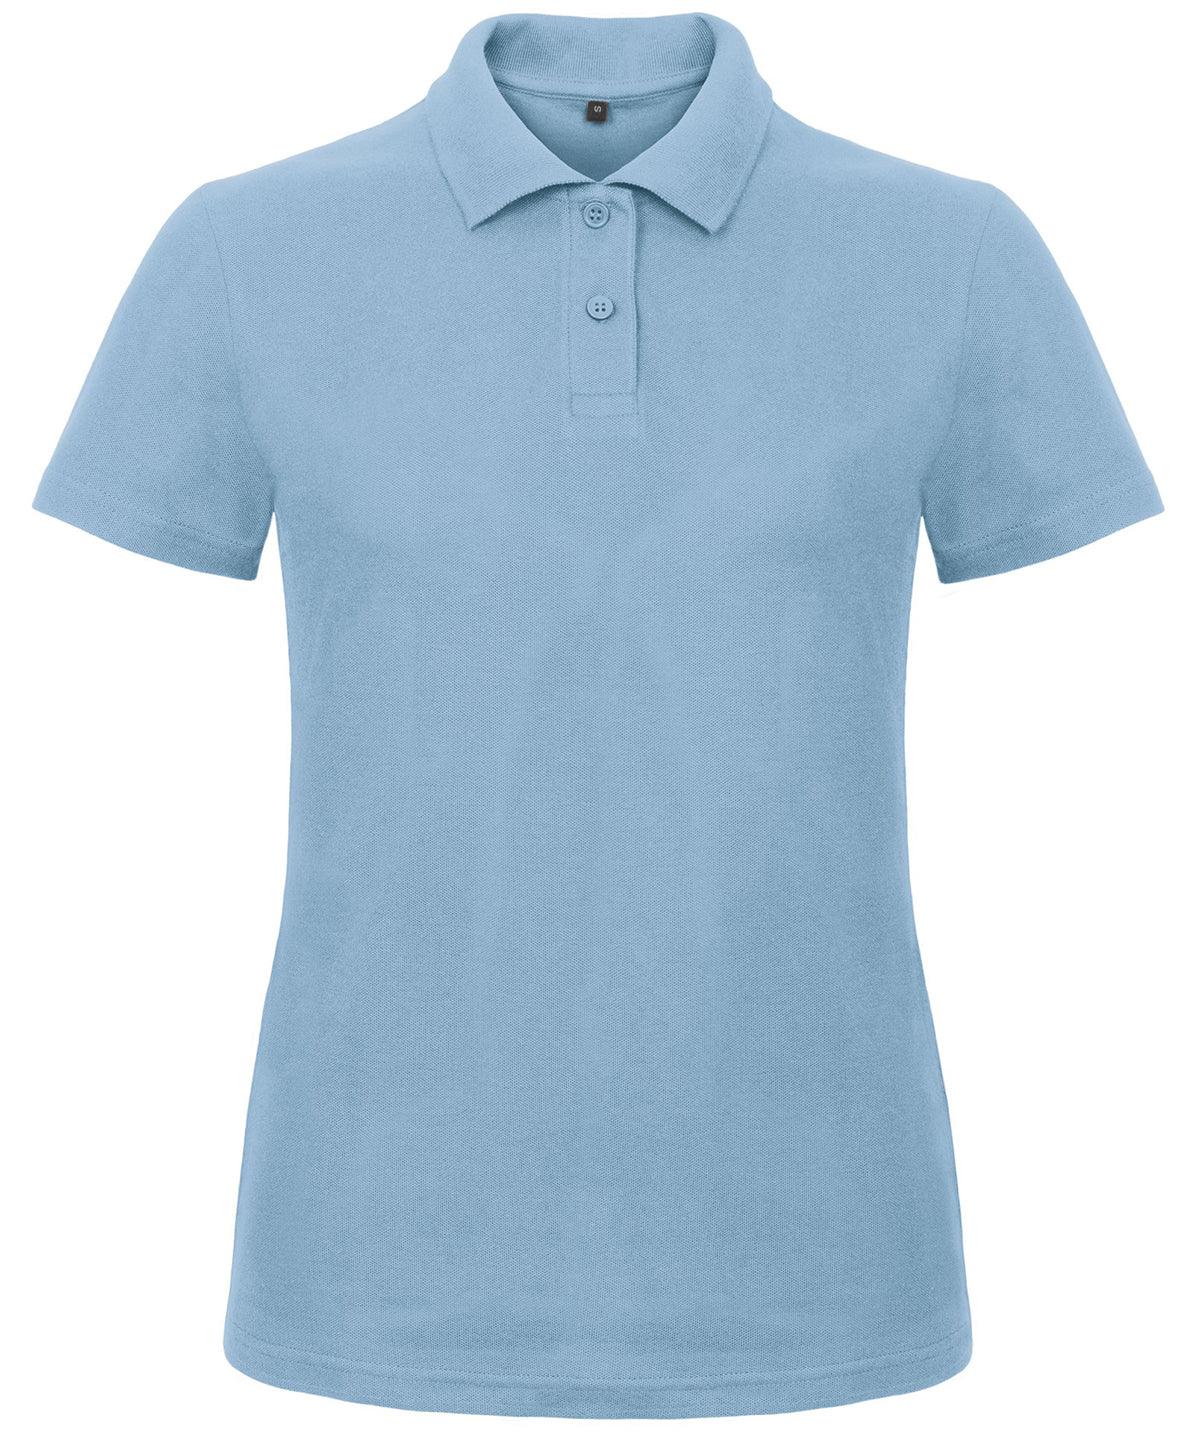 Light Blue - B&C ID.001 polo /women Polos B&C Collection Must Haves, Plus Sizes, Polos & Casual, Women's Fashion Schoolwear Centres